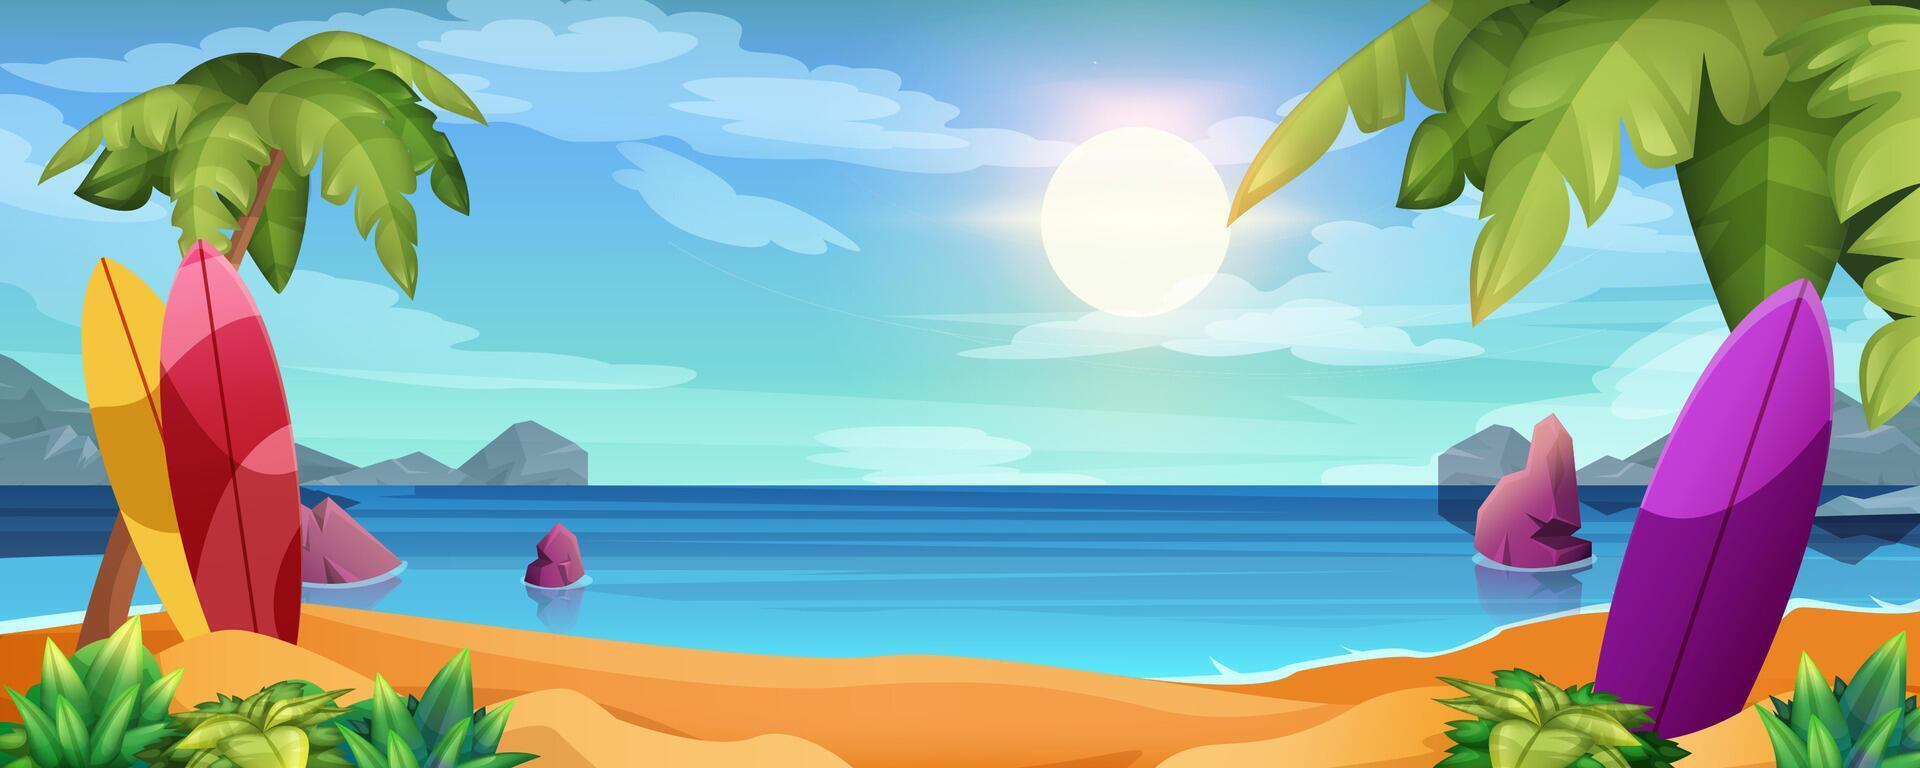 Surfboards on sandy beach. Summer surfing activity, sports recreation cartoon vector illustration. Tropical landscape with palm trees, rocks in water and mountains on horizon. Sea leisure hobby